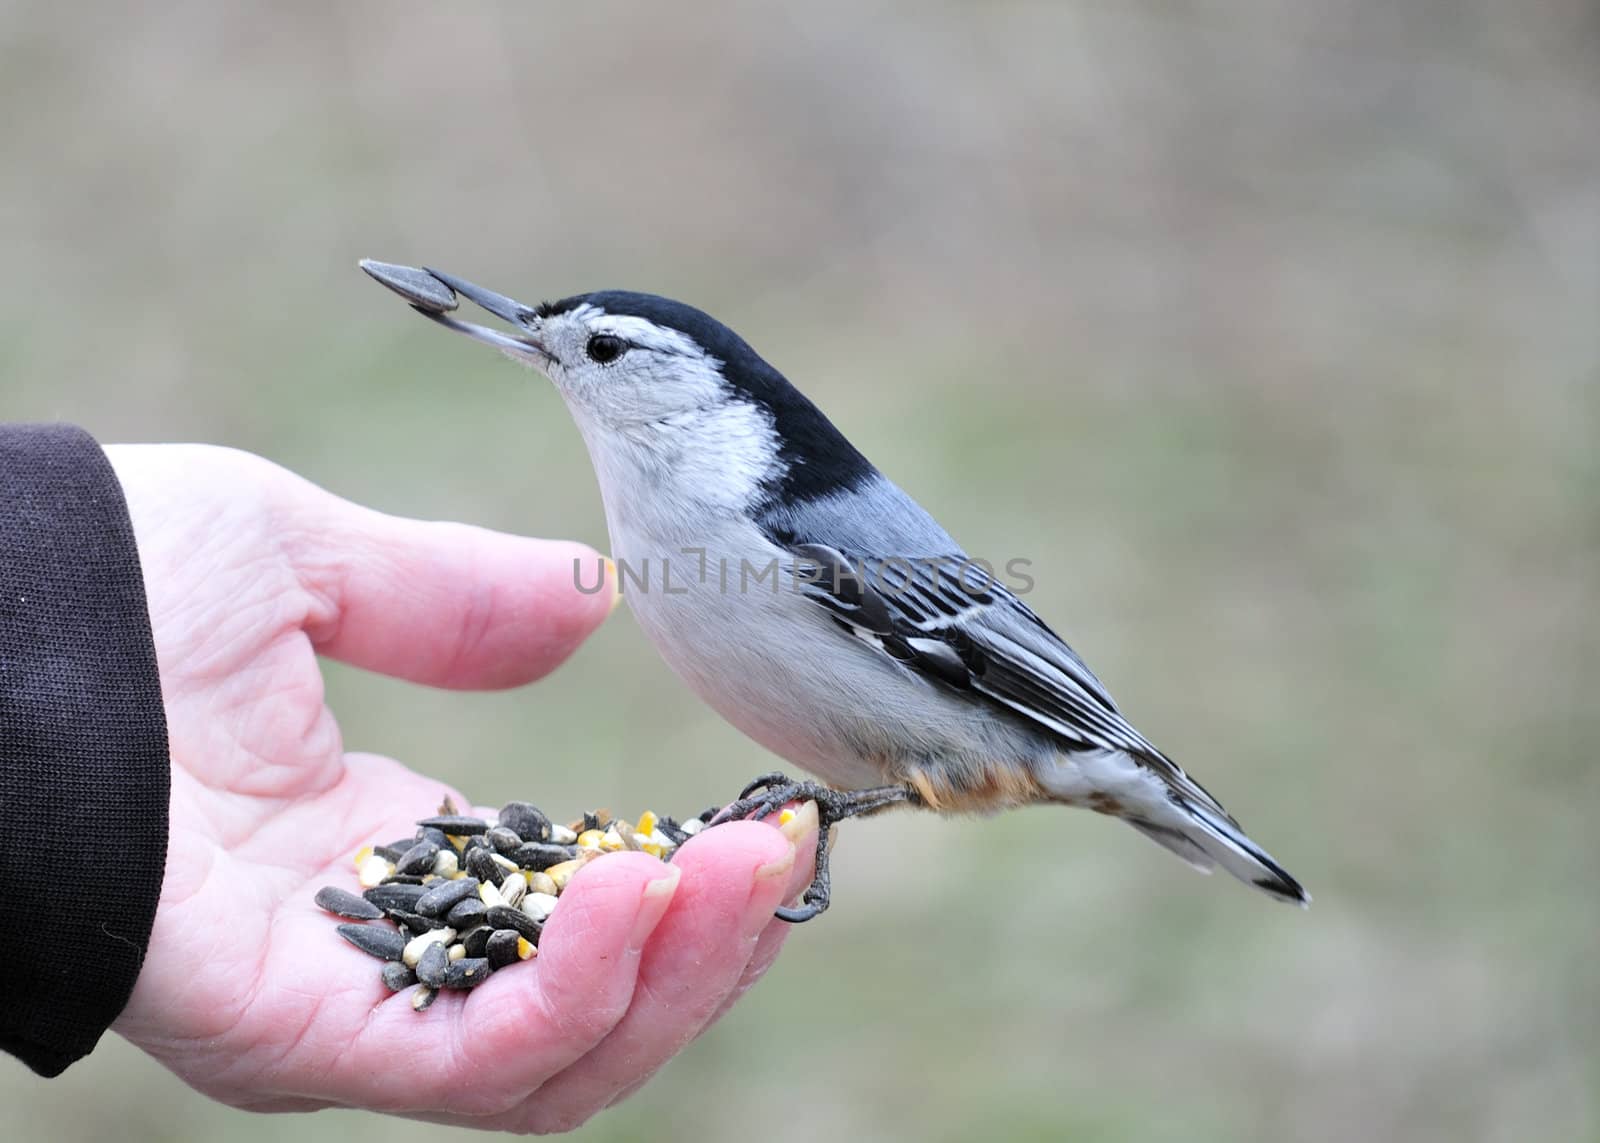 A nuthatch perched on a hand with bird seed.